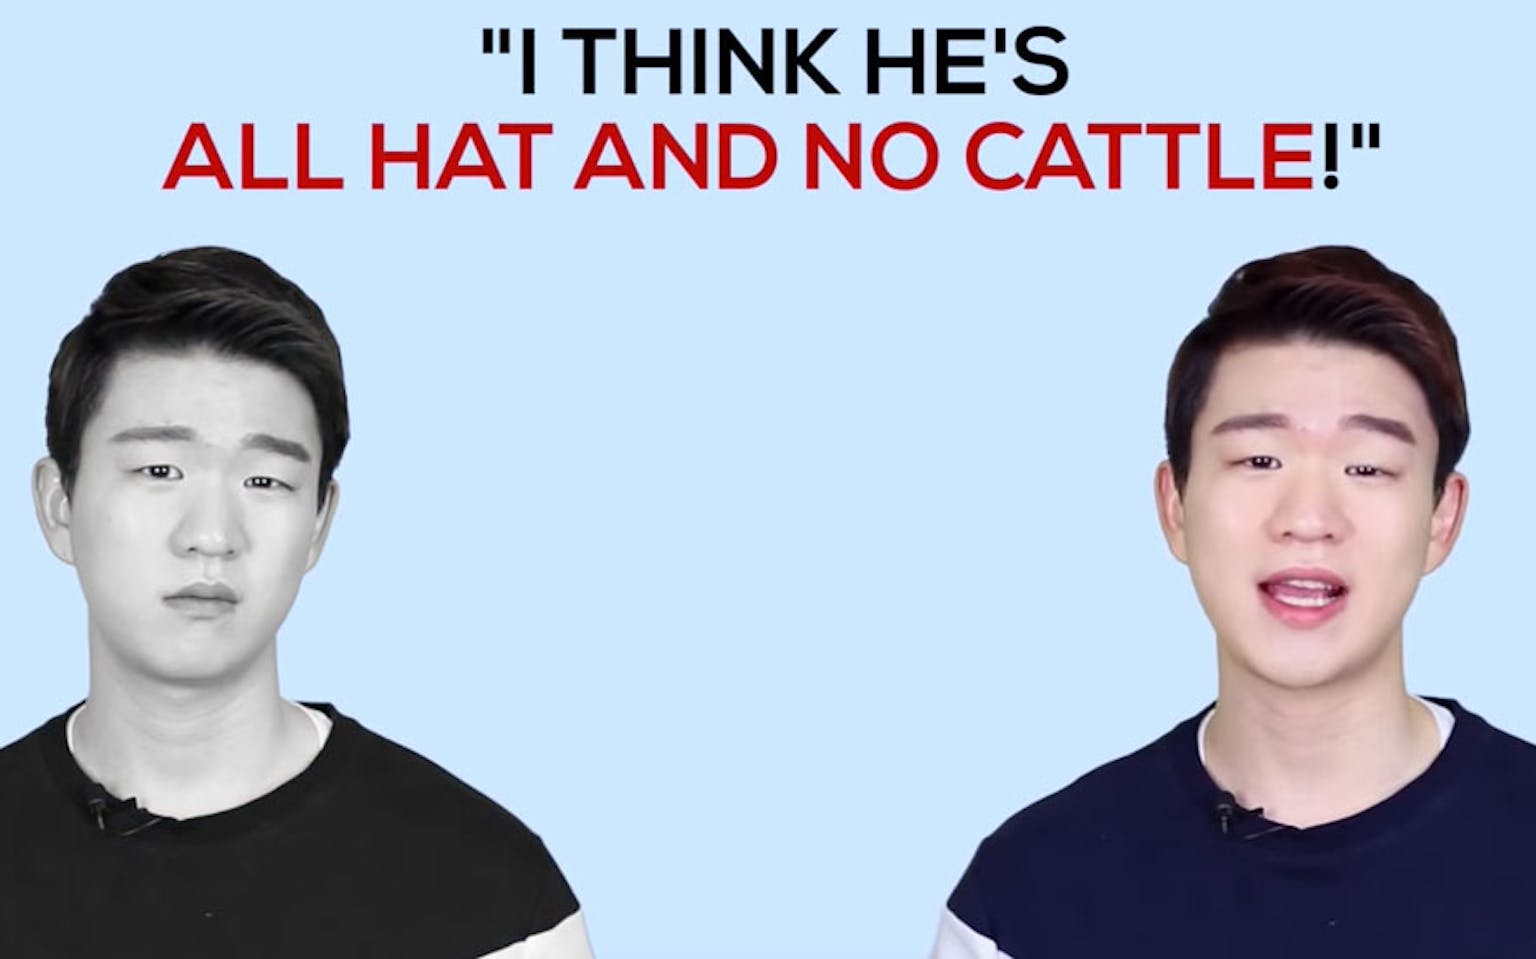 Learn How to Speak Like a Texan from YouTube Star 